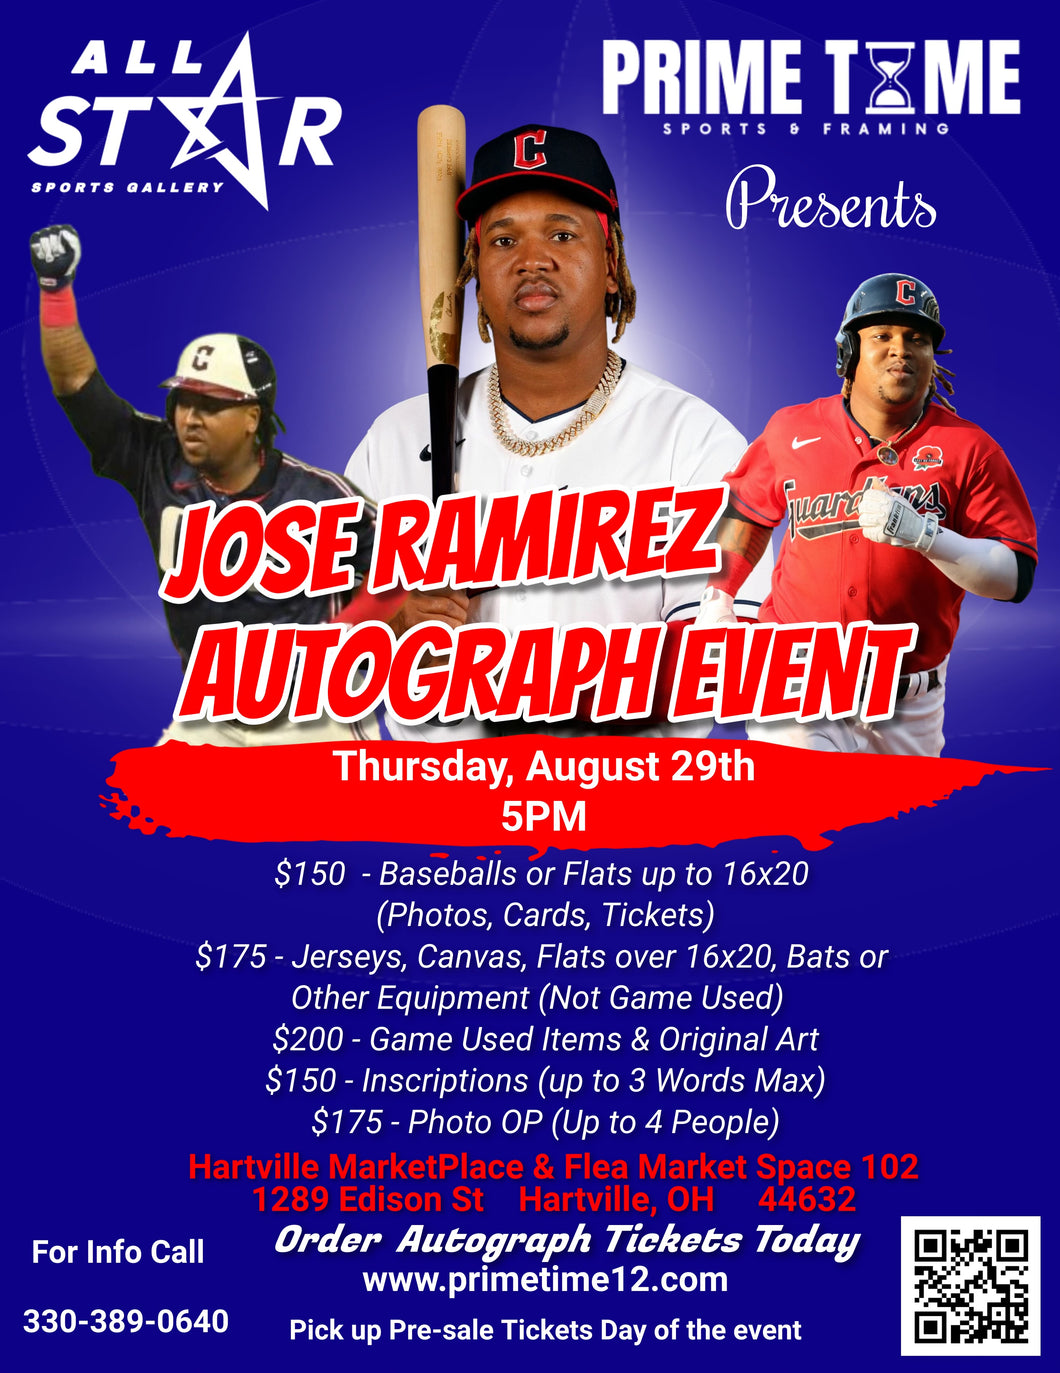 Jose Ramirez Pre-Sale ticket for autograph signing on any 1 Baseball or Flat item up to 16x20 (Photo, card, magazine, or ticket)